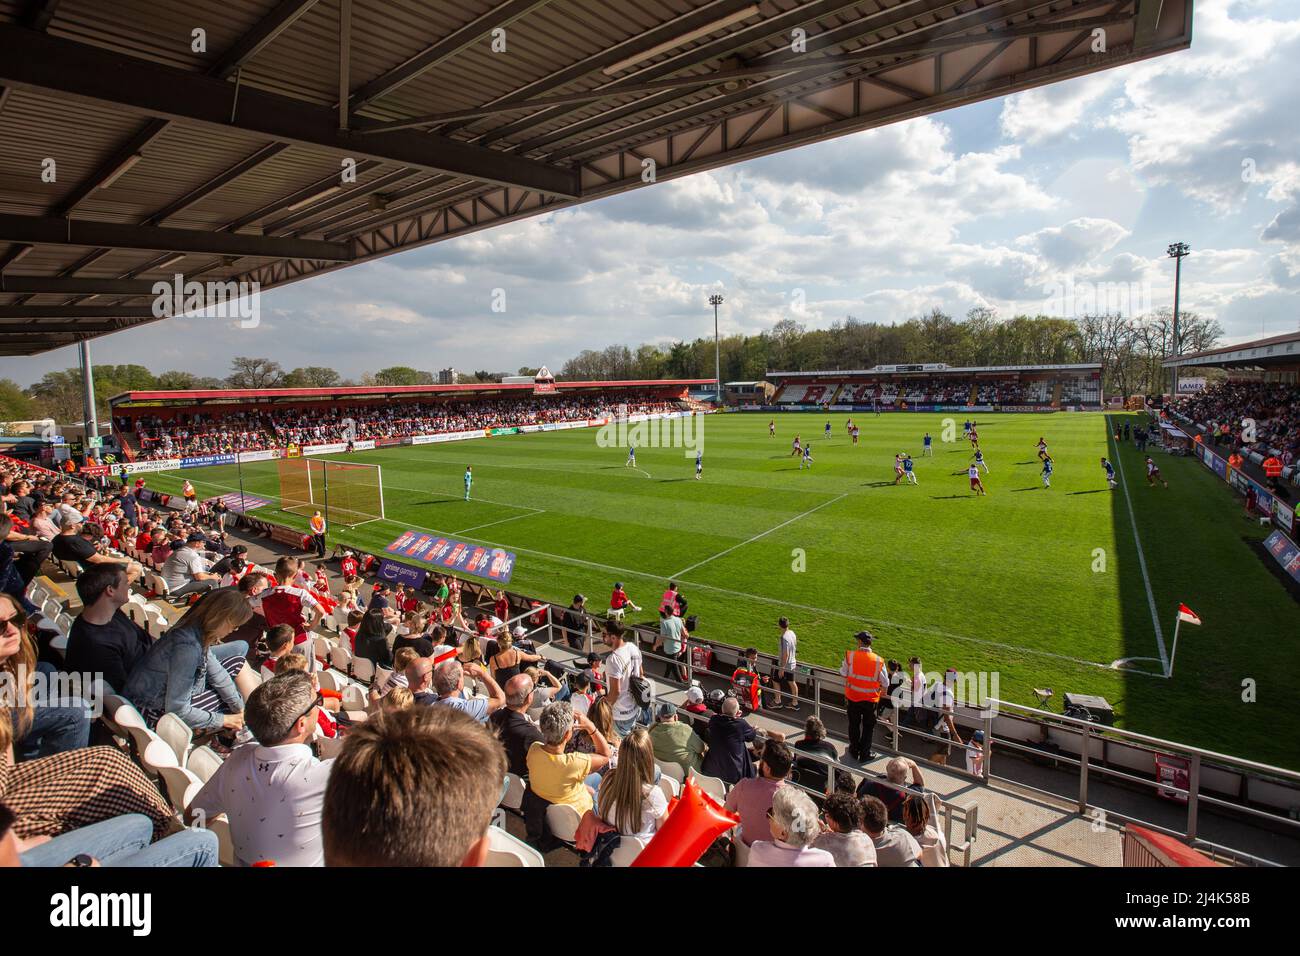 View from North Stand at lower leagues football / soccer ground Lamex Stadium during match. Home to Stevenage Football Club Stock Photo